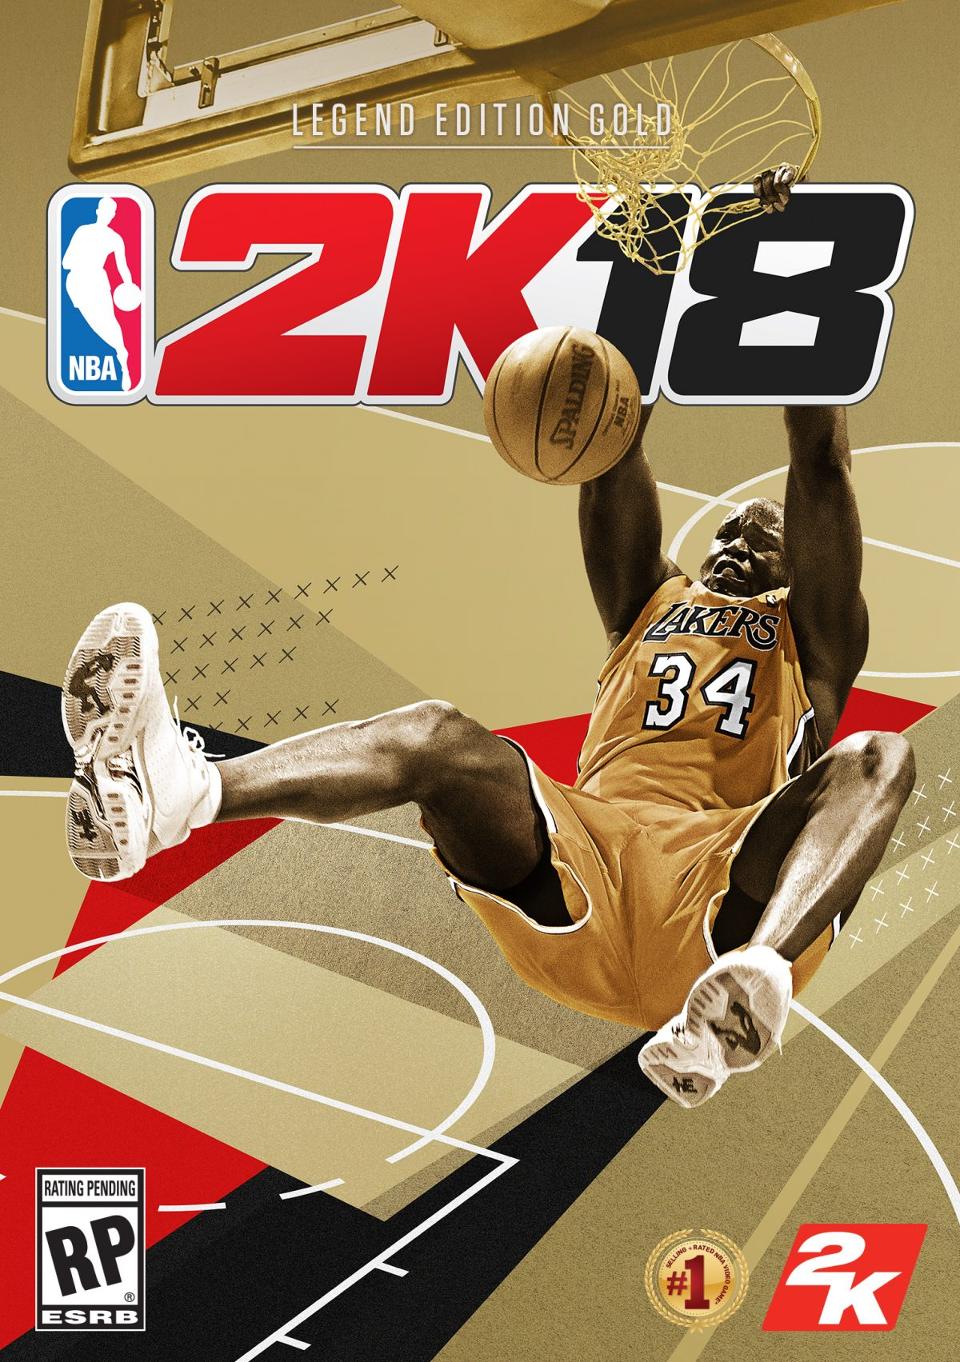 NBA 2K18 Cover Will Feature Shaquille O'Neal